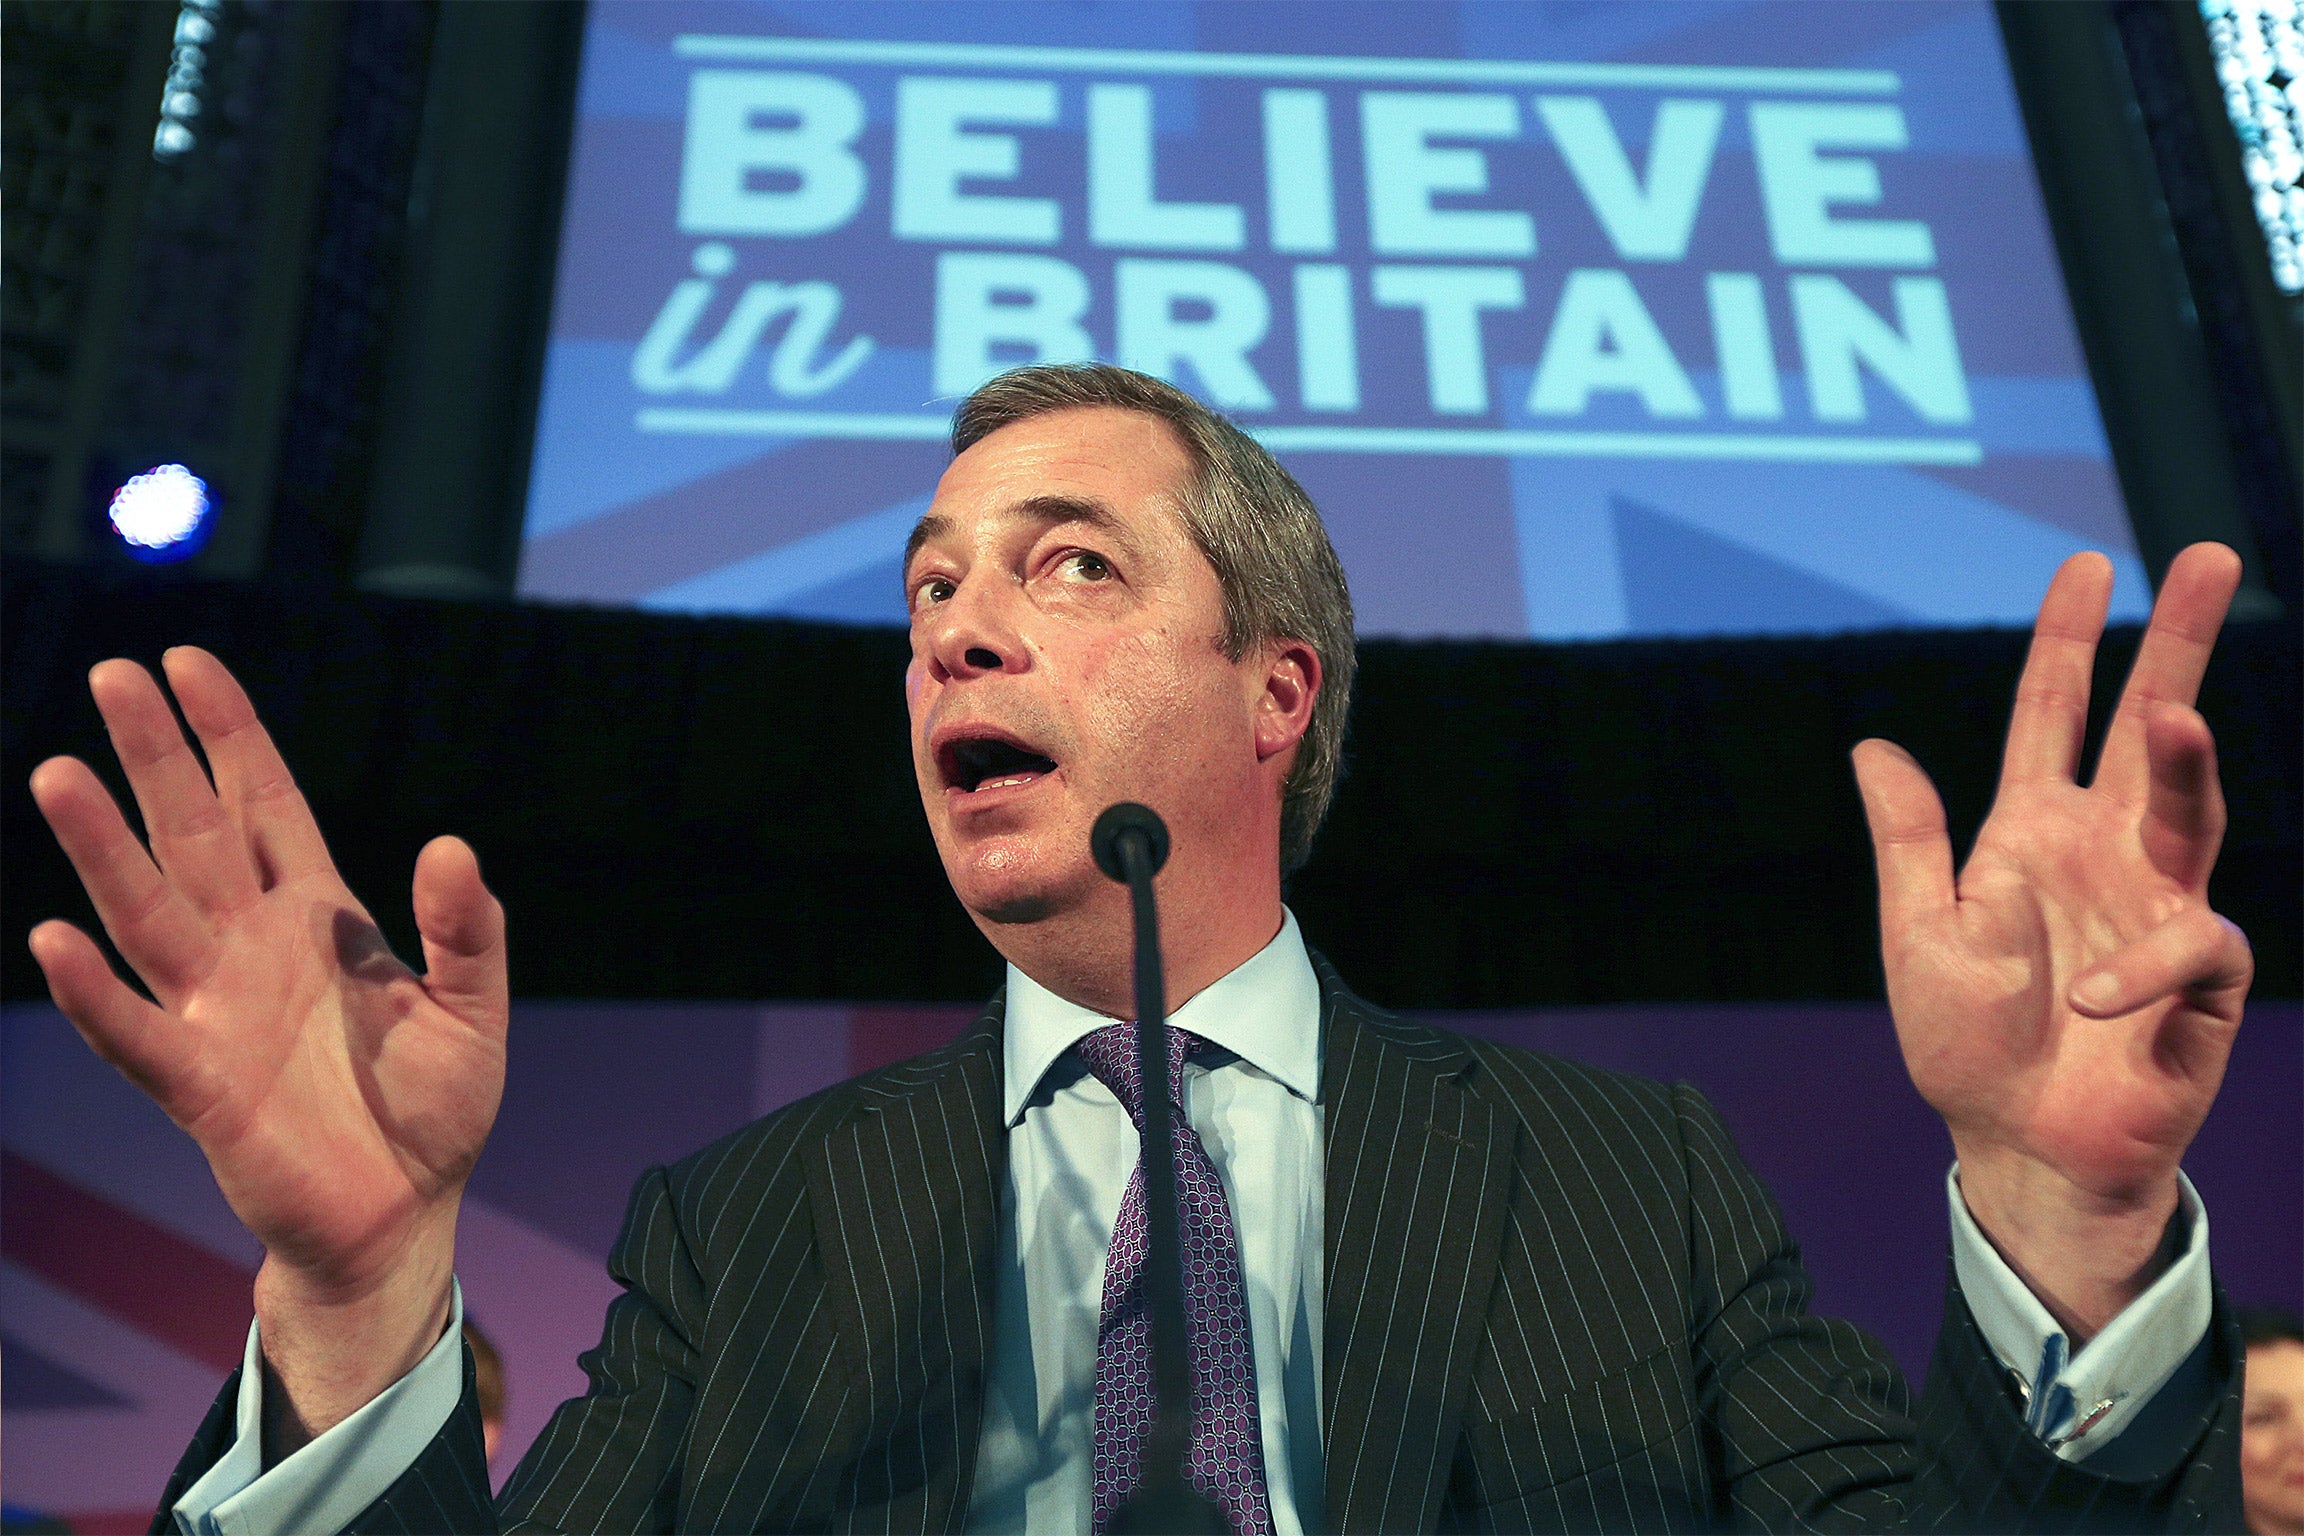 The Ukip leader was speaking at a conference in London